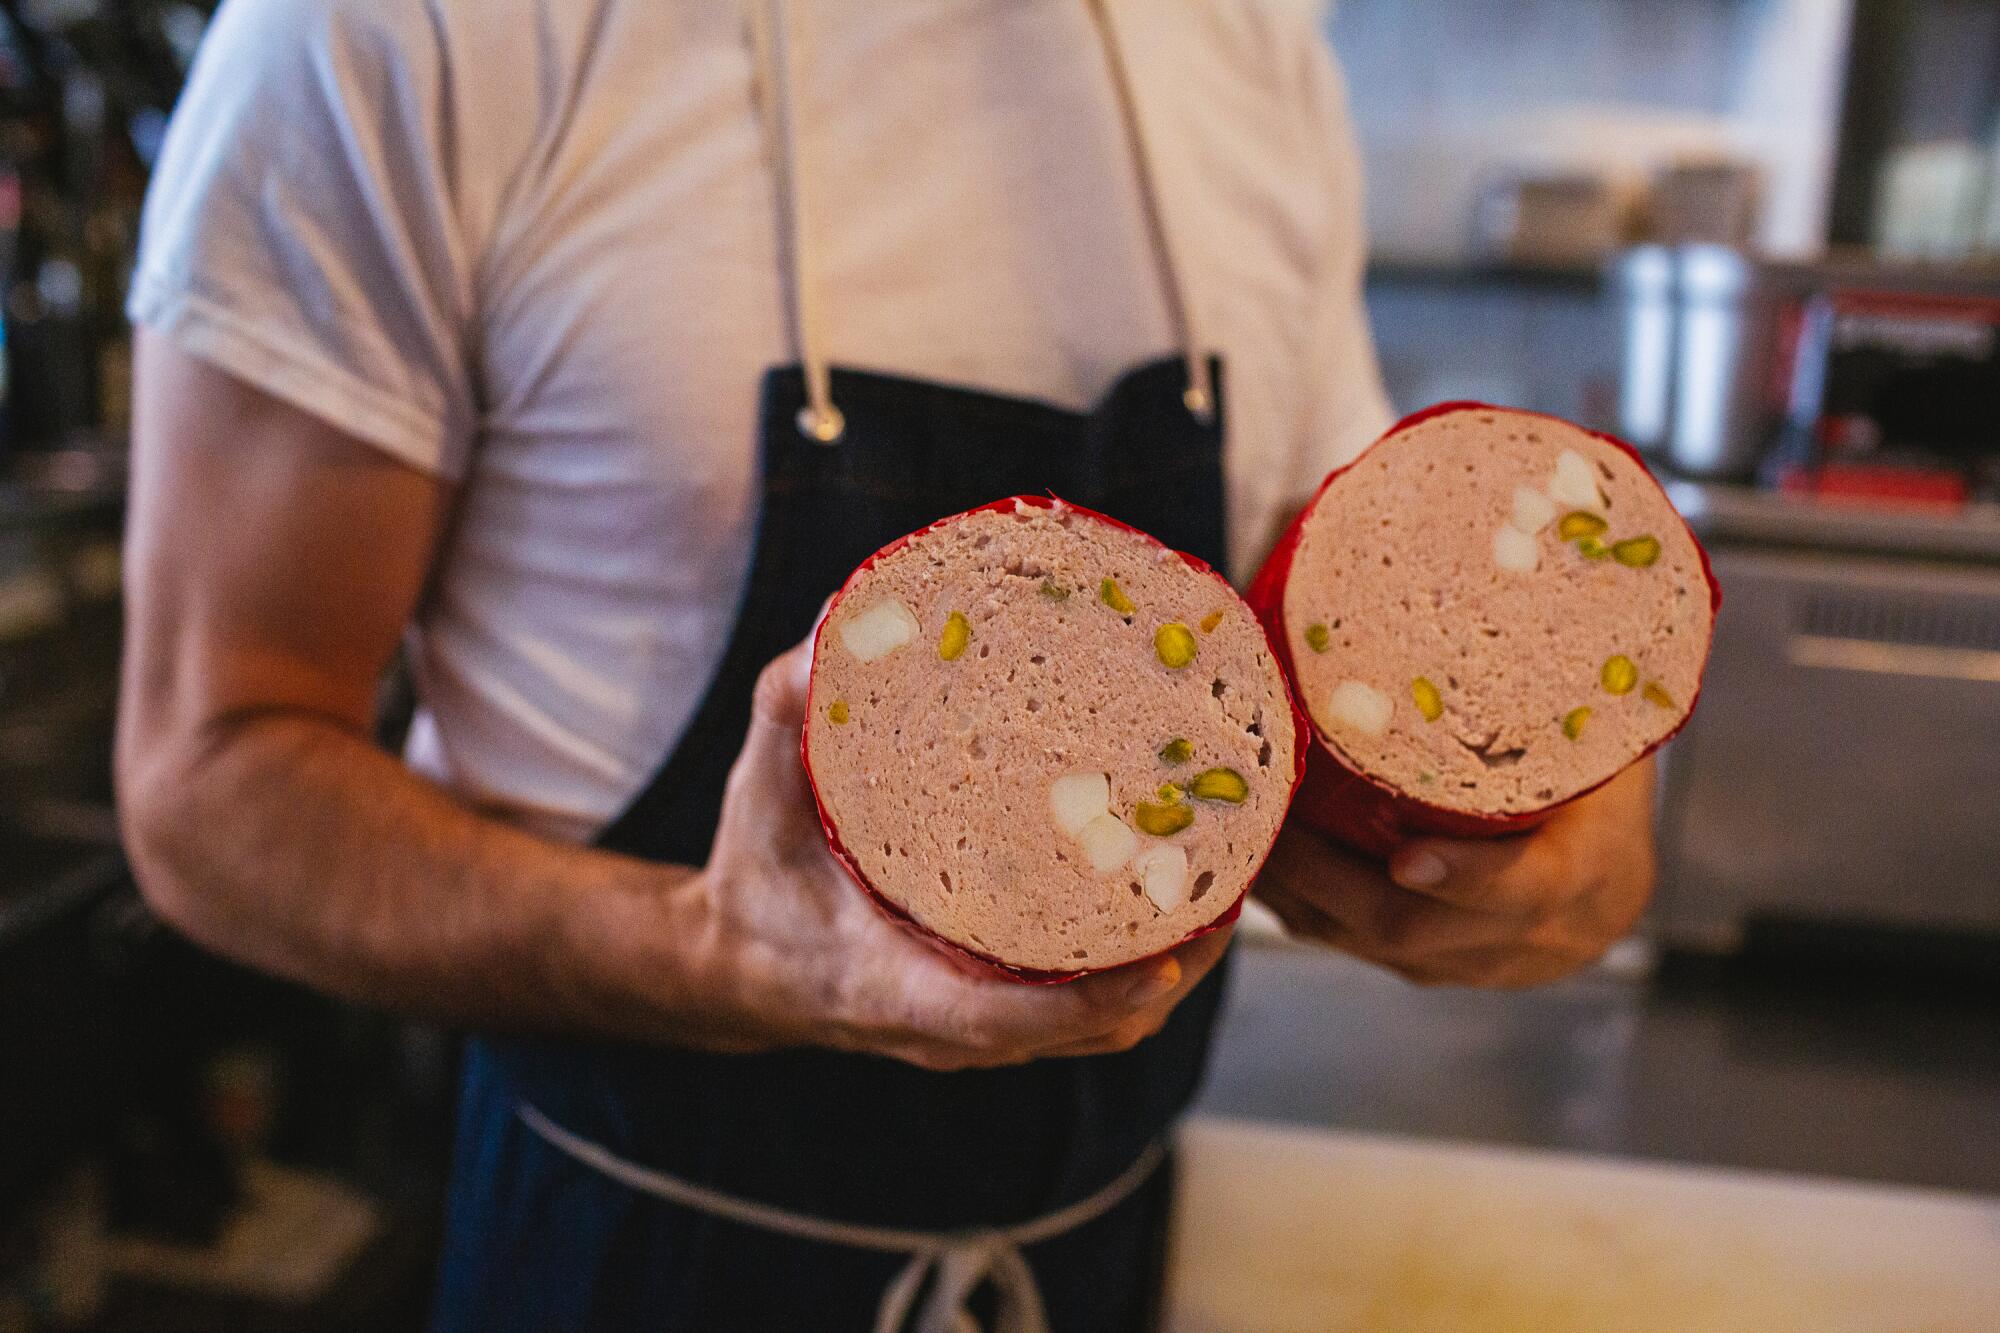 A chef in an apron holds a freshly made mortadella, sliced in half and open toward the camera.